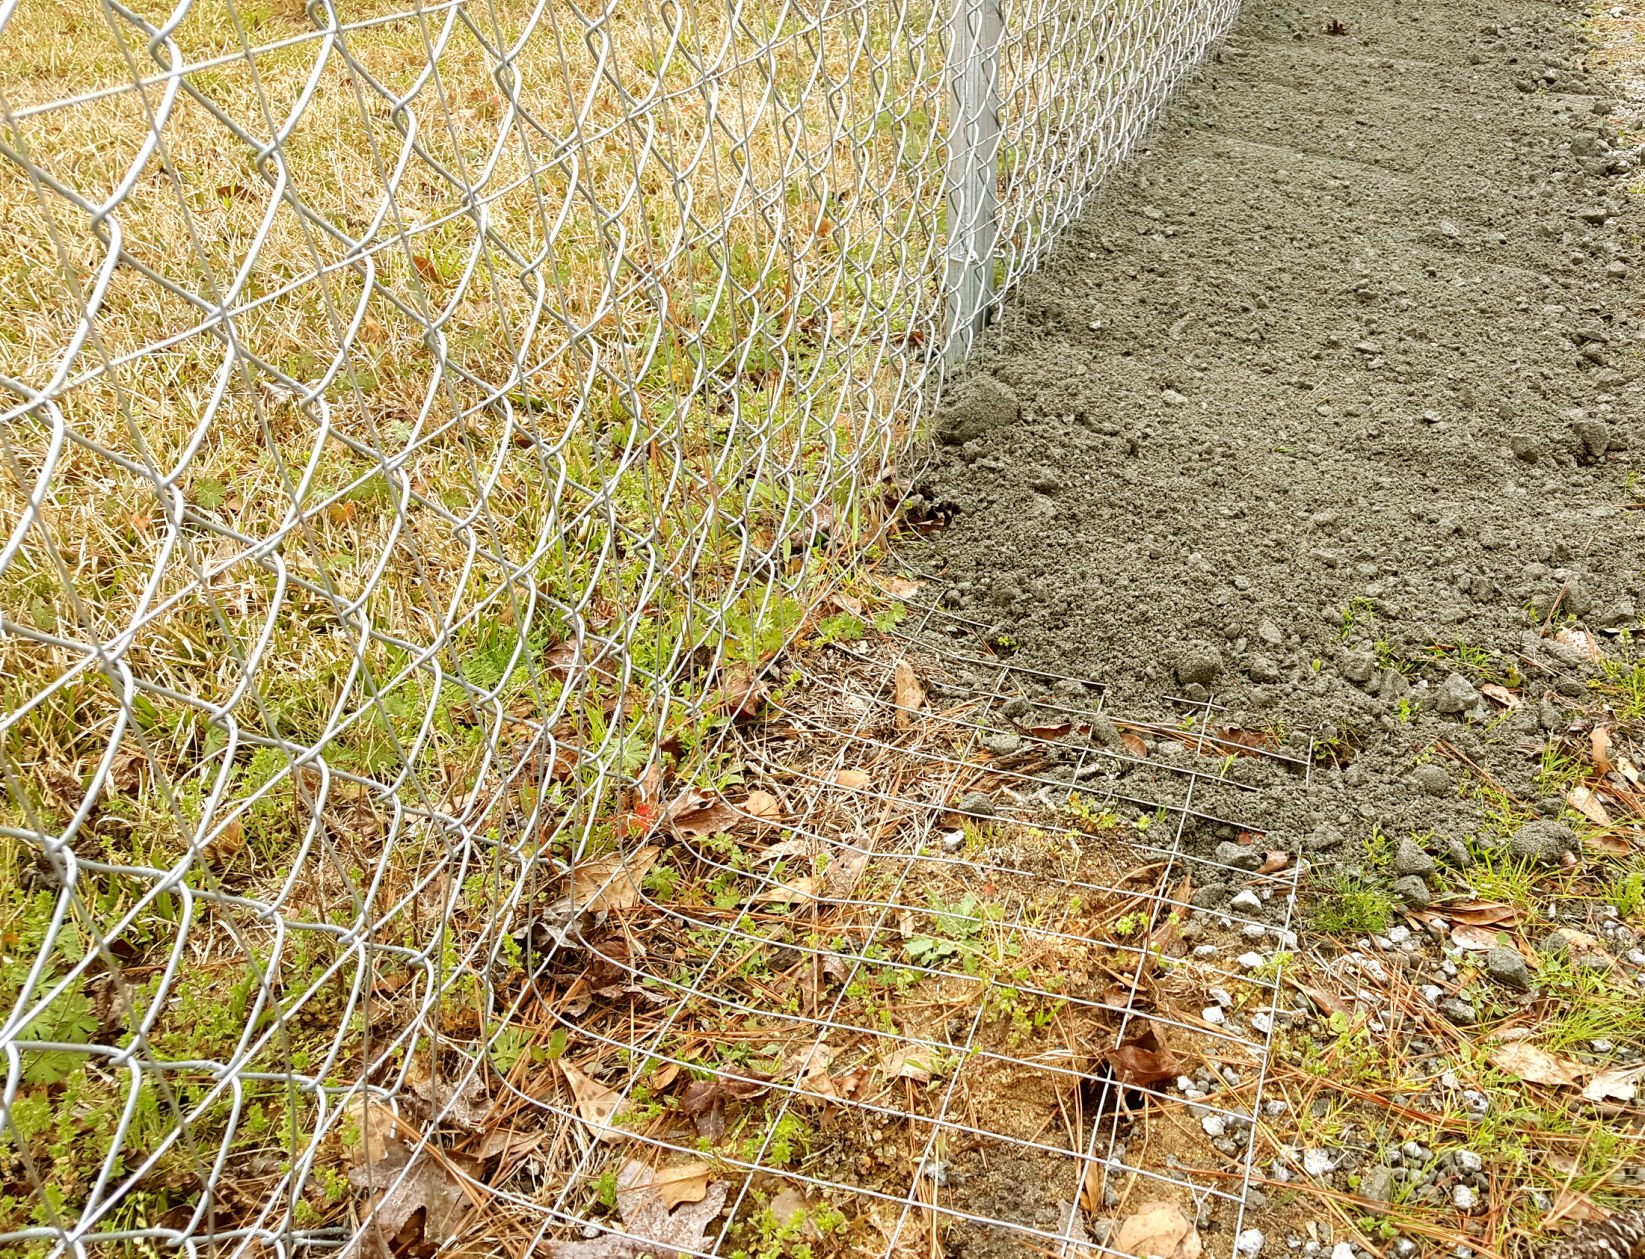 fence for rabbits